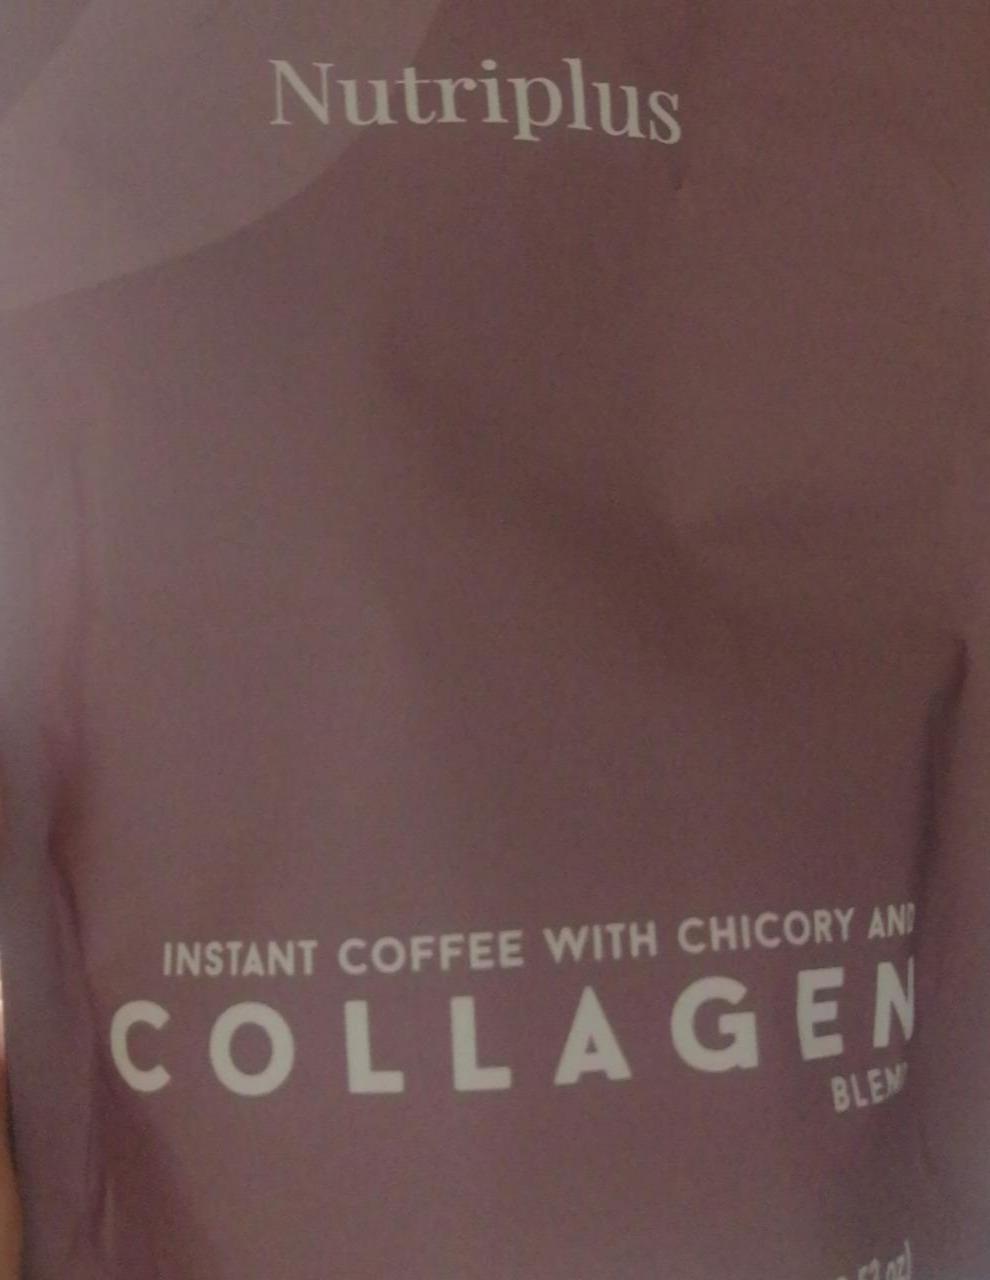 Fotografie - Instant coffee with chicory and collagen blend Nutriplus